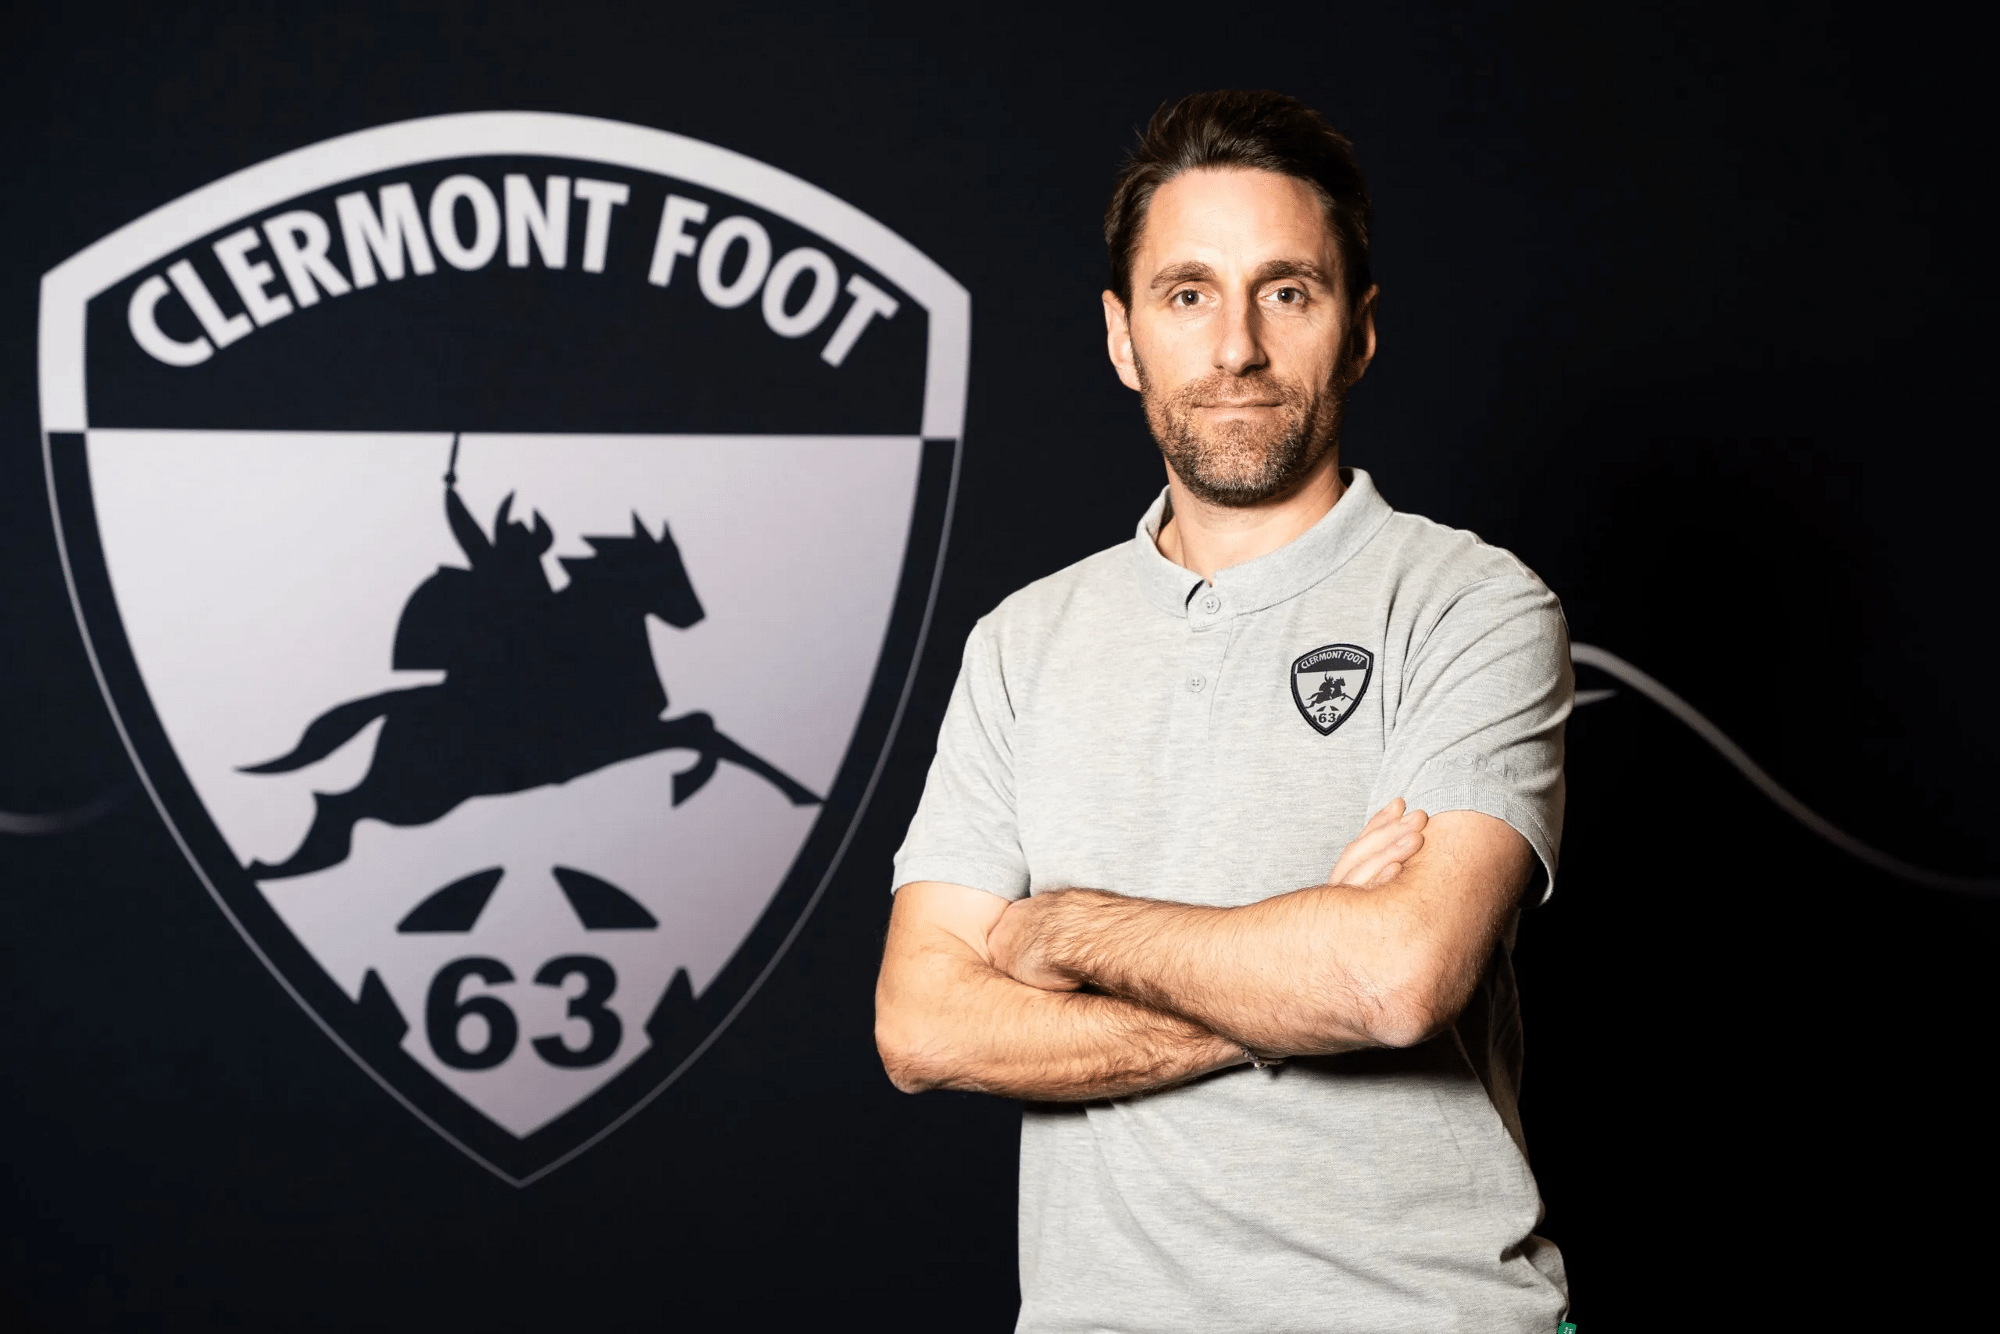 Sébastian Bichard will be Clermont Foot's new manager from the end of the season